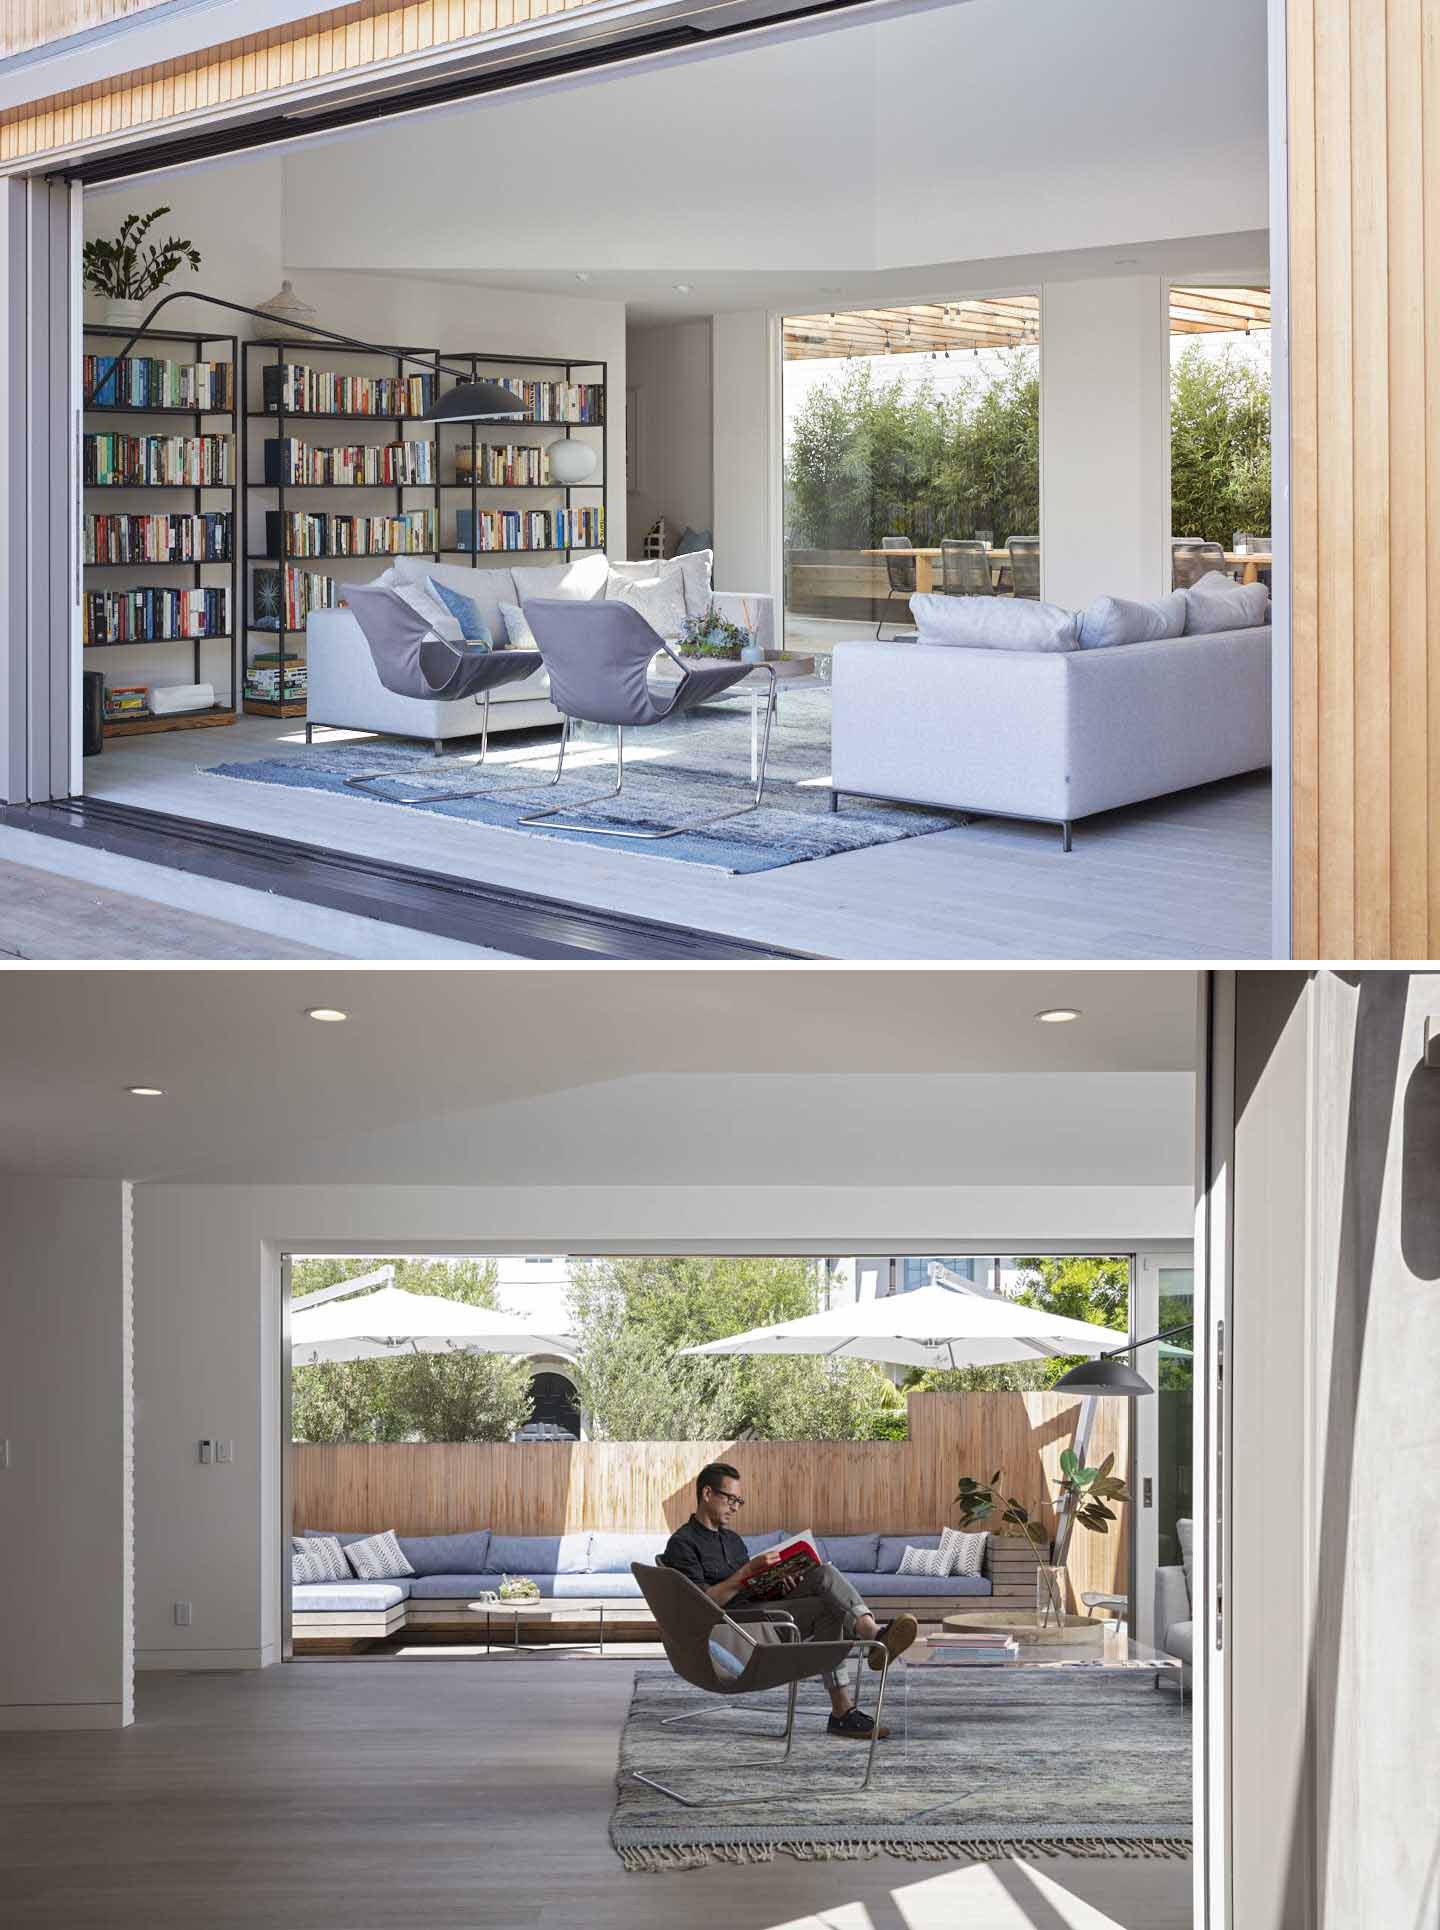 The living room has two large slider doors that invite ample light inside while connecting to outdoor spaces.